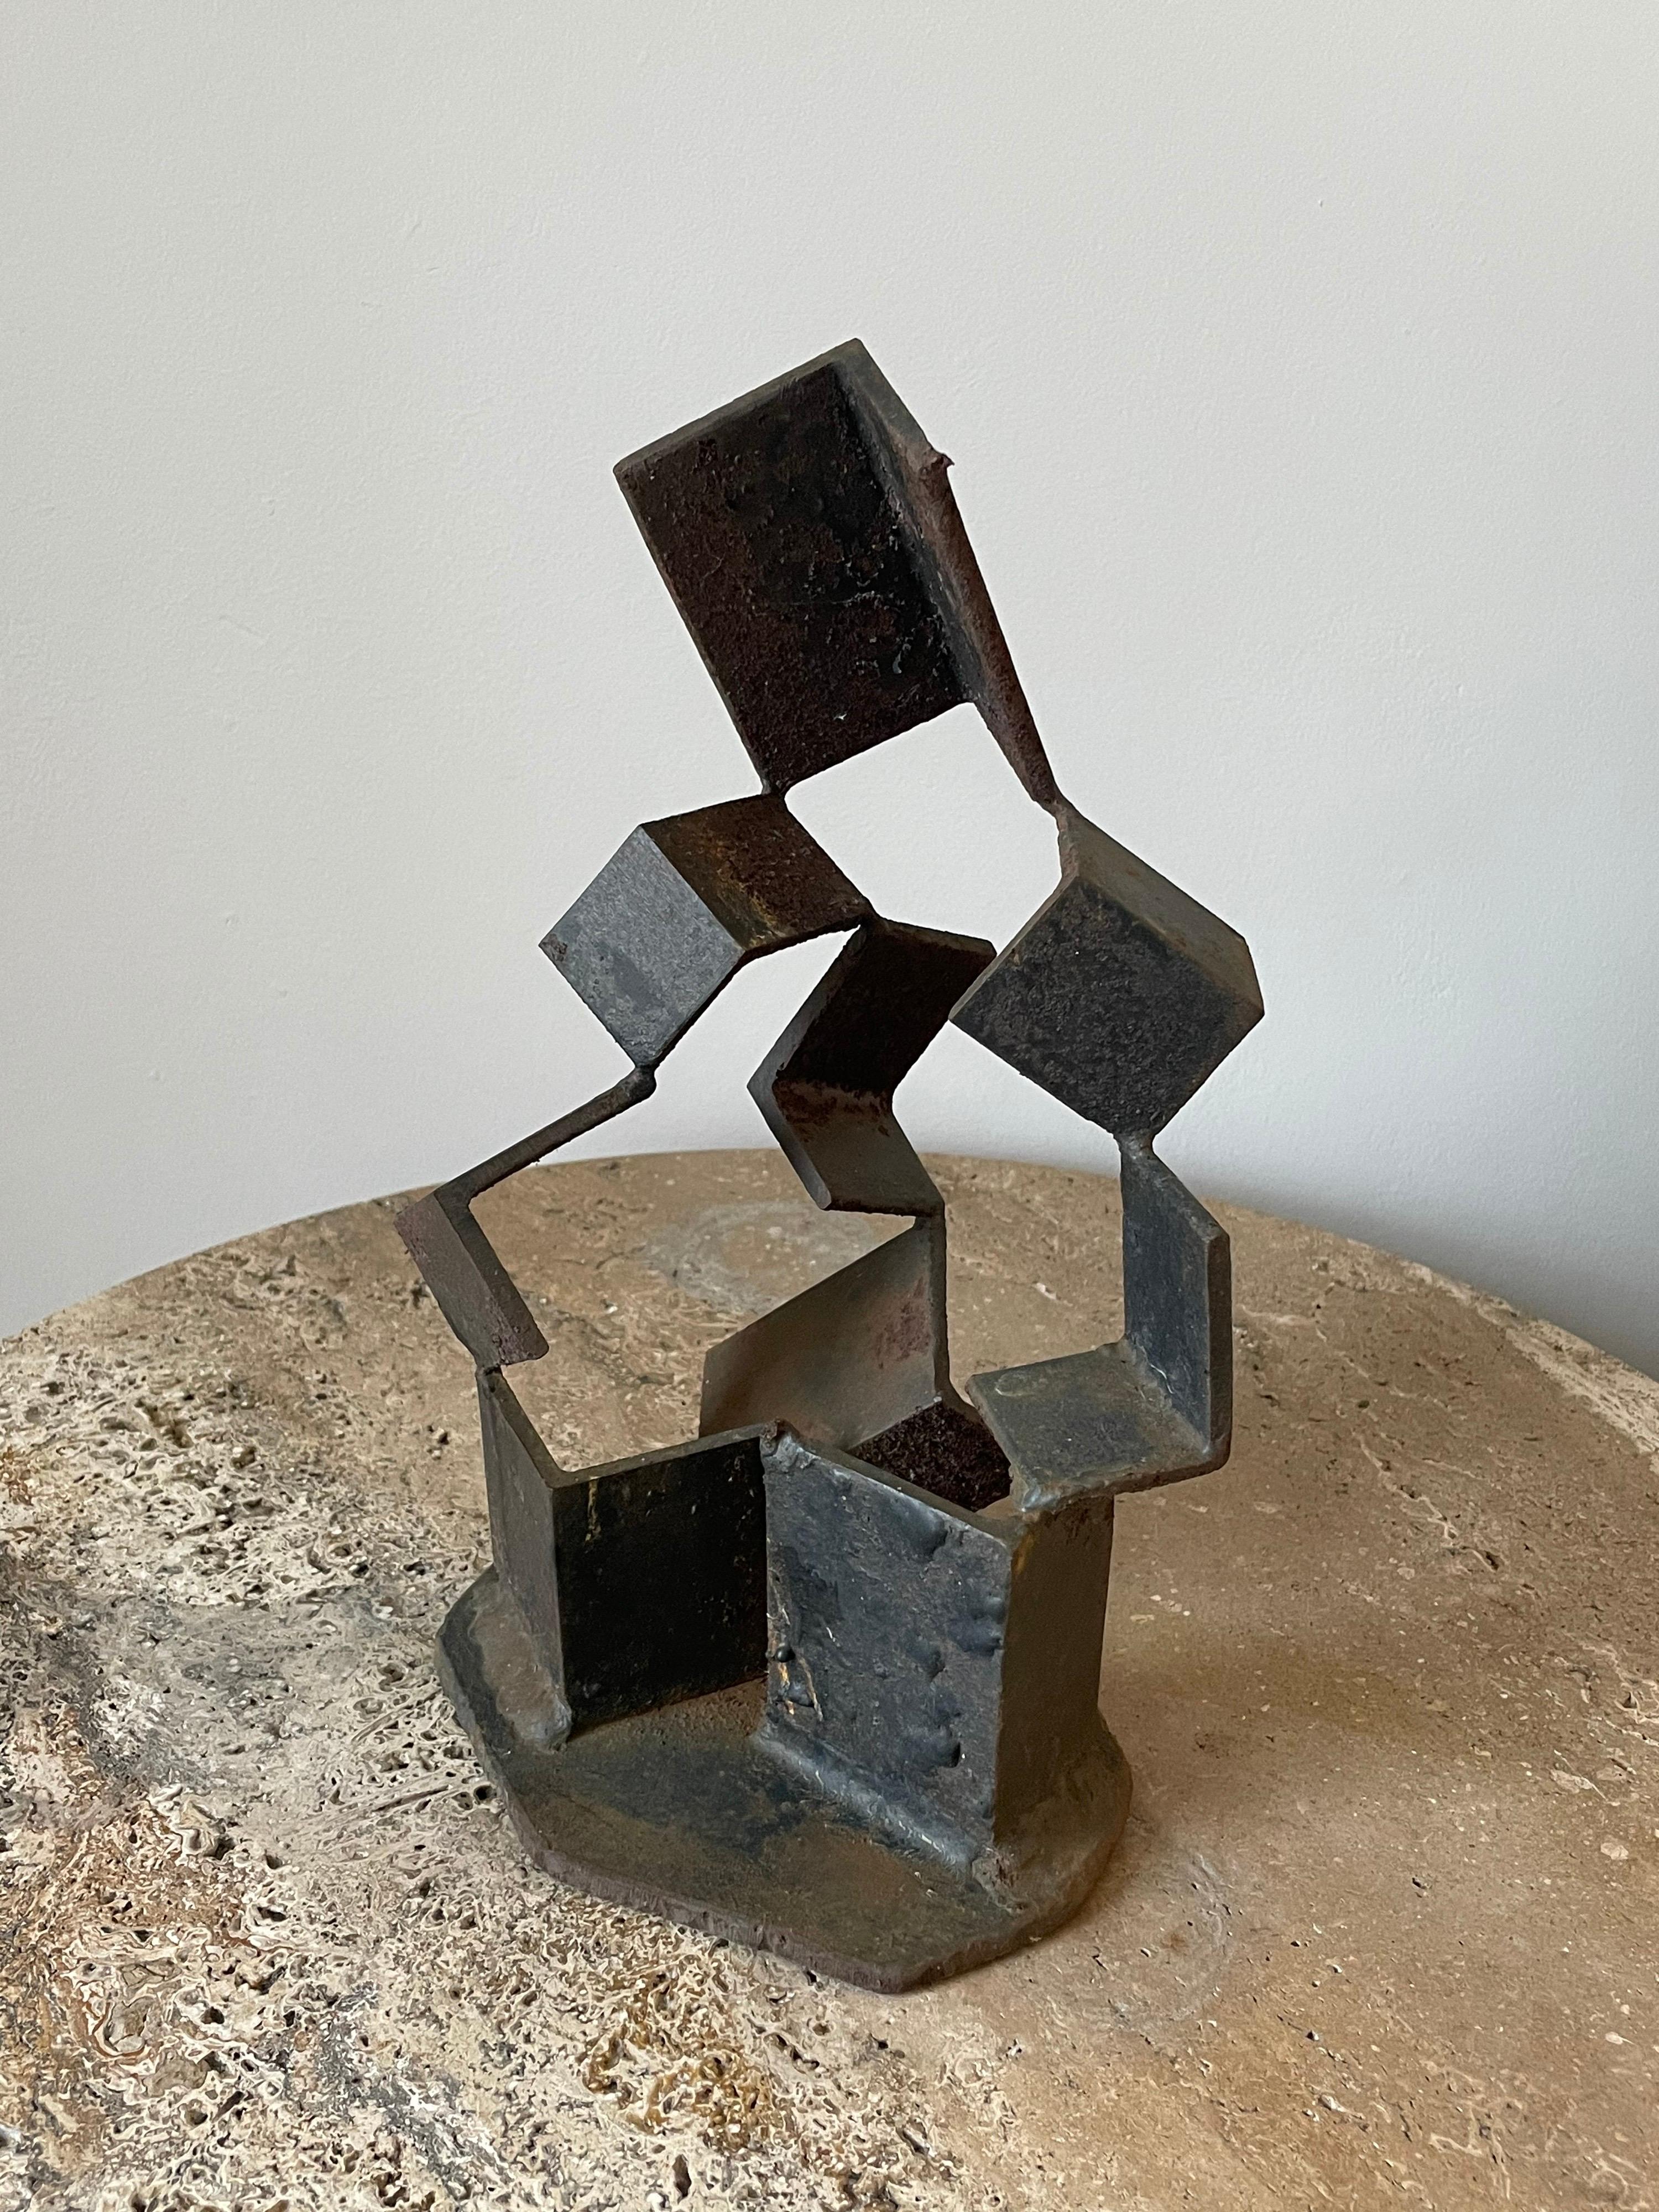 Unusual welded steel sculpture which consists of multiple pieces attached at the corners producing a floating appearance.